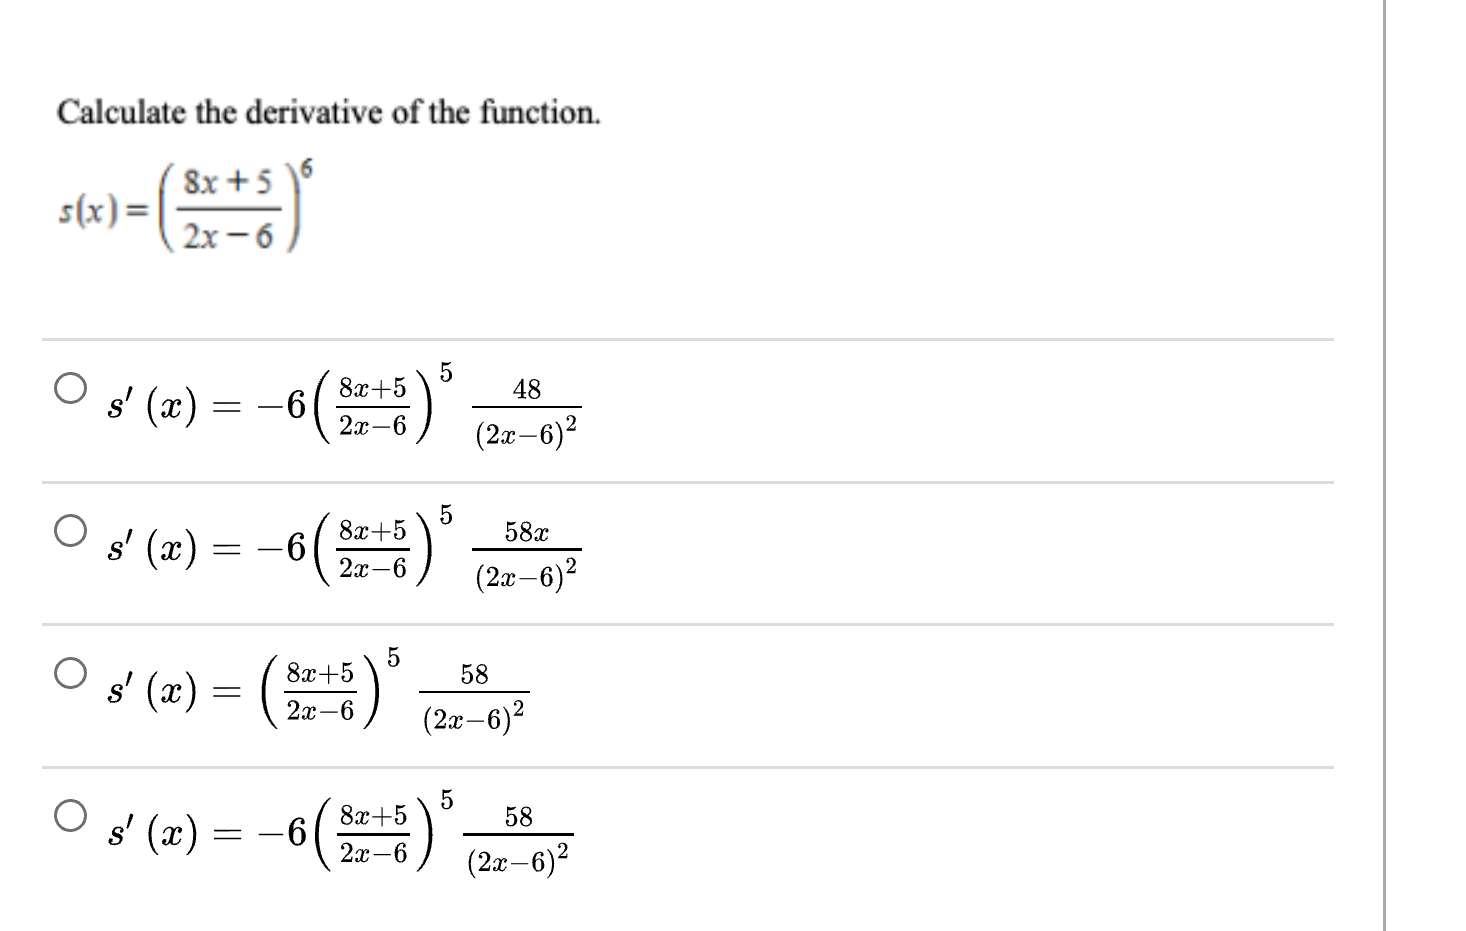 Calculate the derivative of the function.
8x +5
s(x)=
2x - 6
